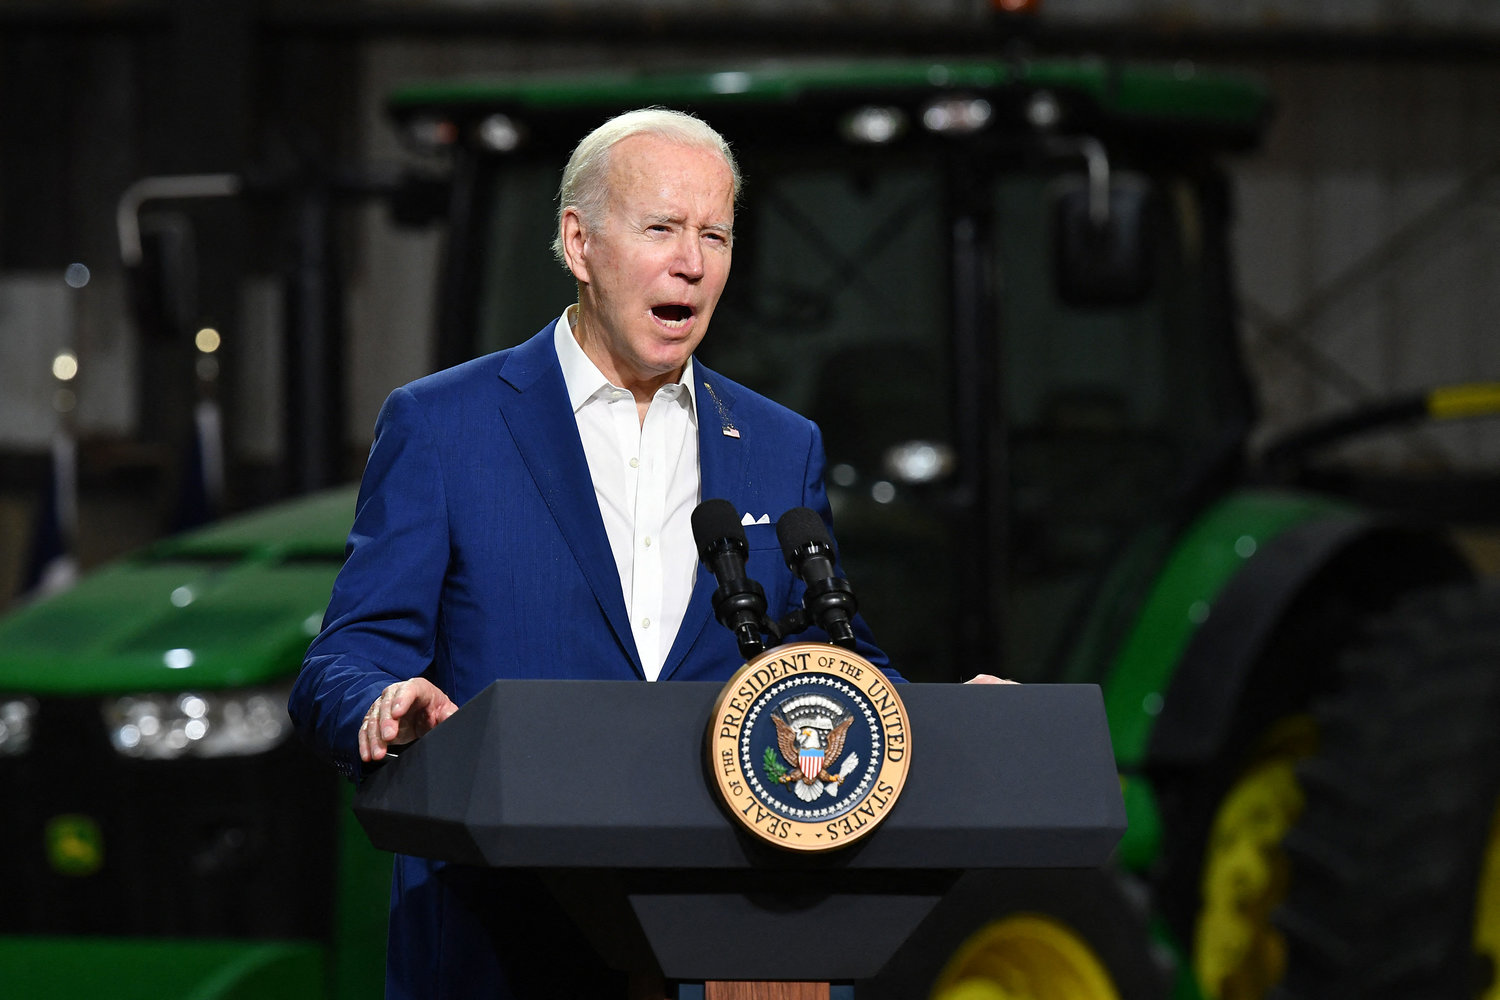 U.S. President Joe Biden announces steps to ease rising consumer prices at POET Bioprocessing, in Menlo, Iowa, on April 12, 2022. (Mandel Ngan/AFP/Getty Images/TNS)